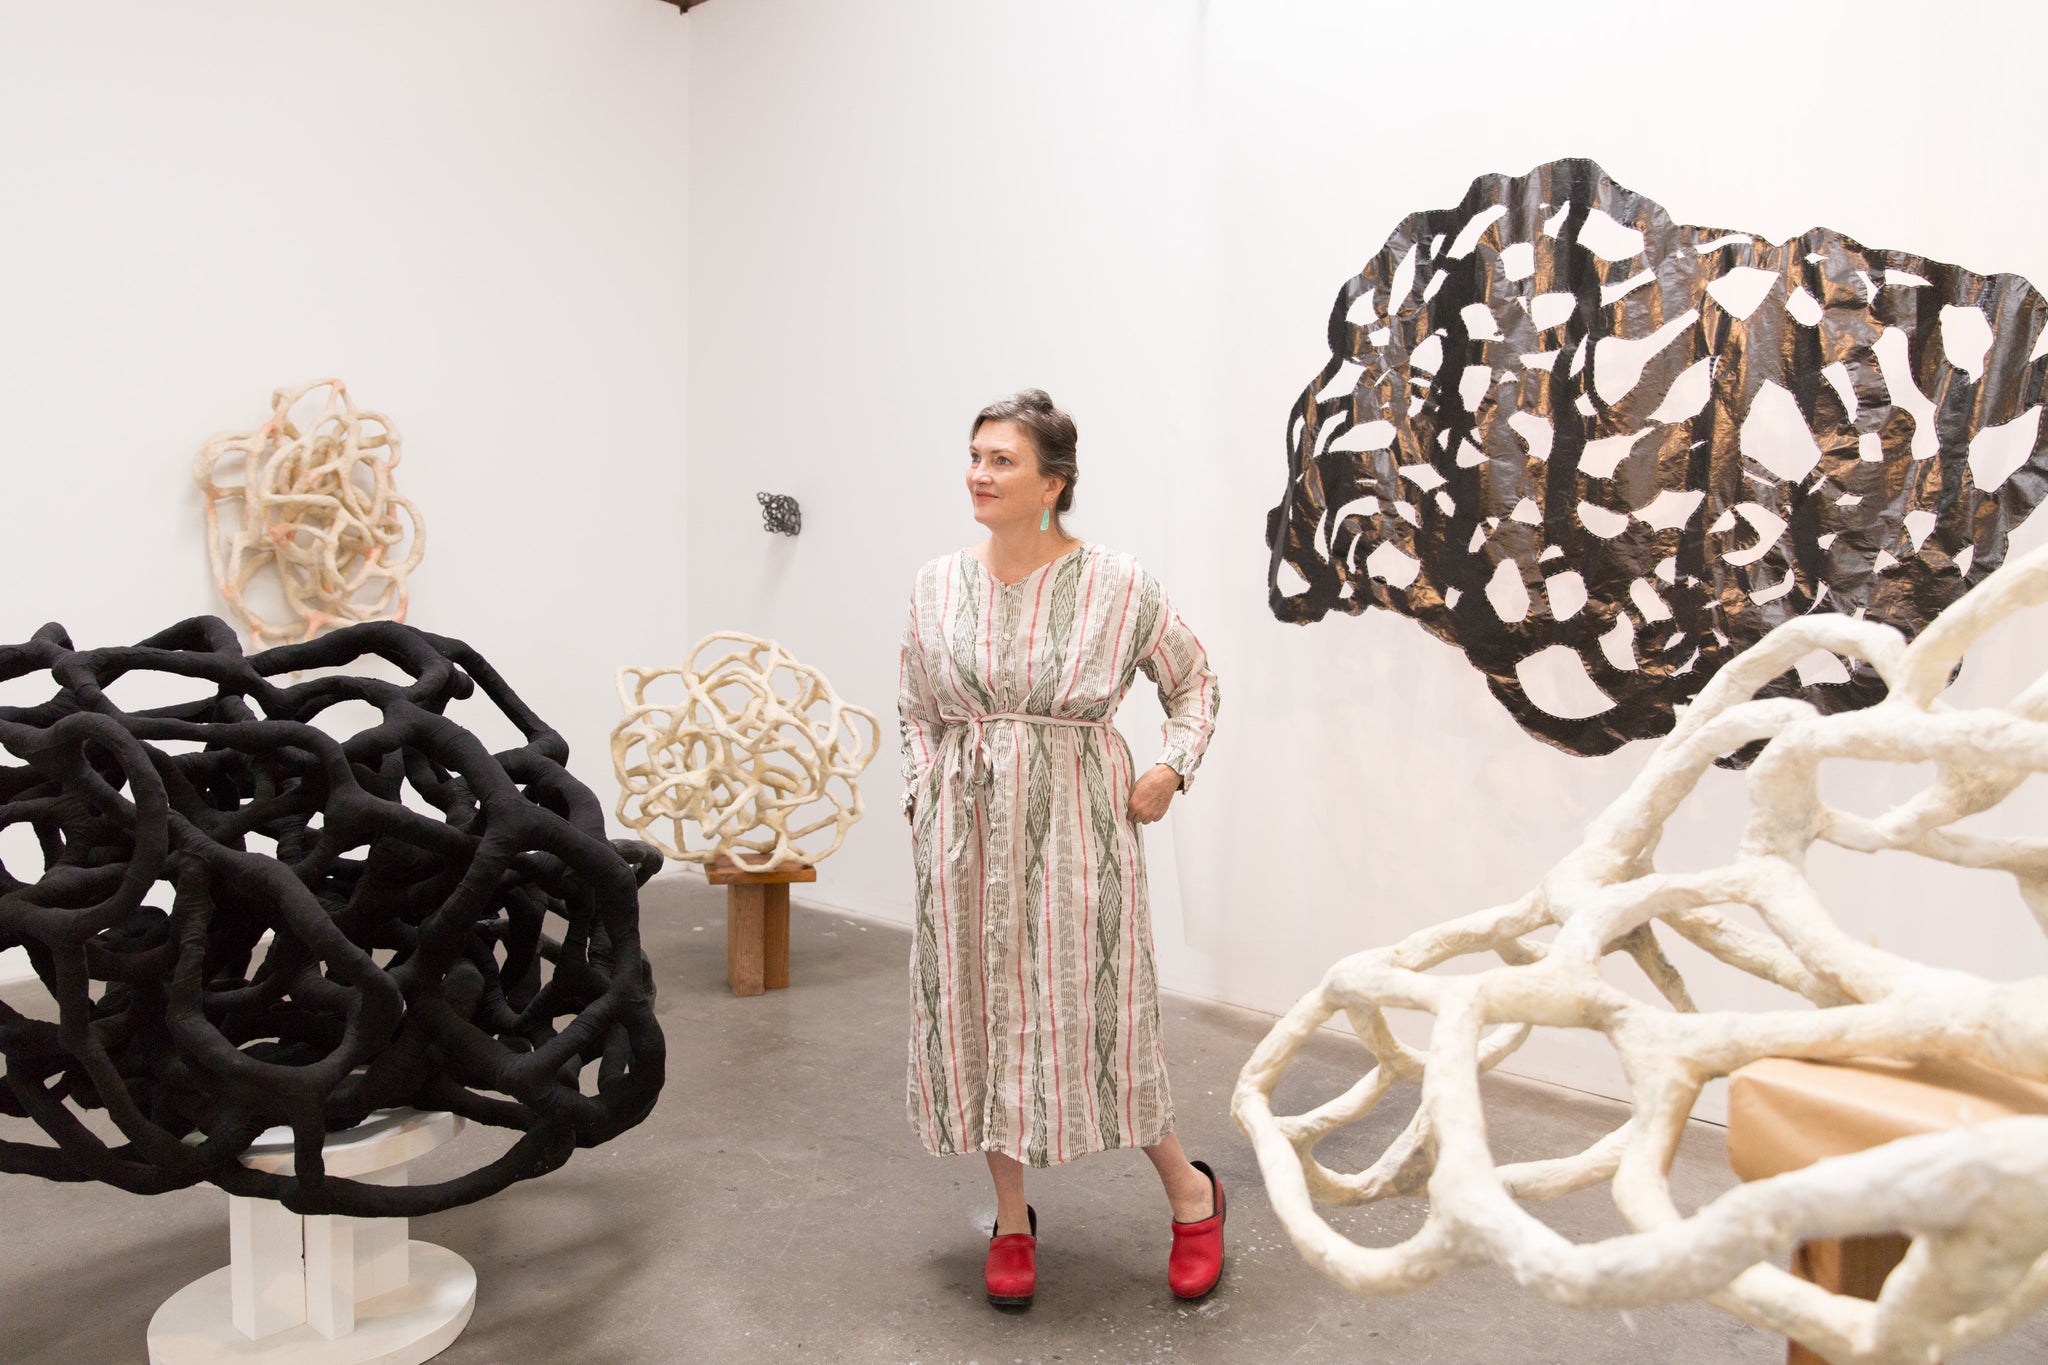 artist, Laura Cooper, surrounded by her sculptures in Los Angeles studio